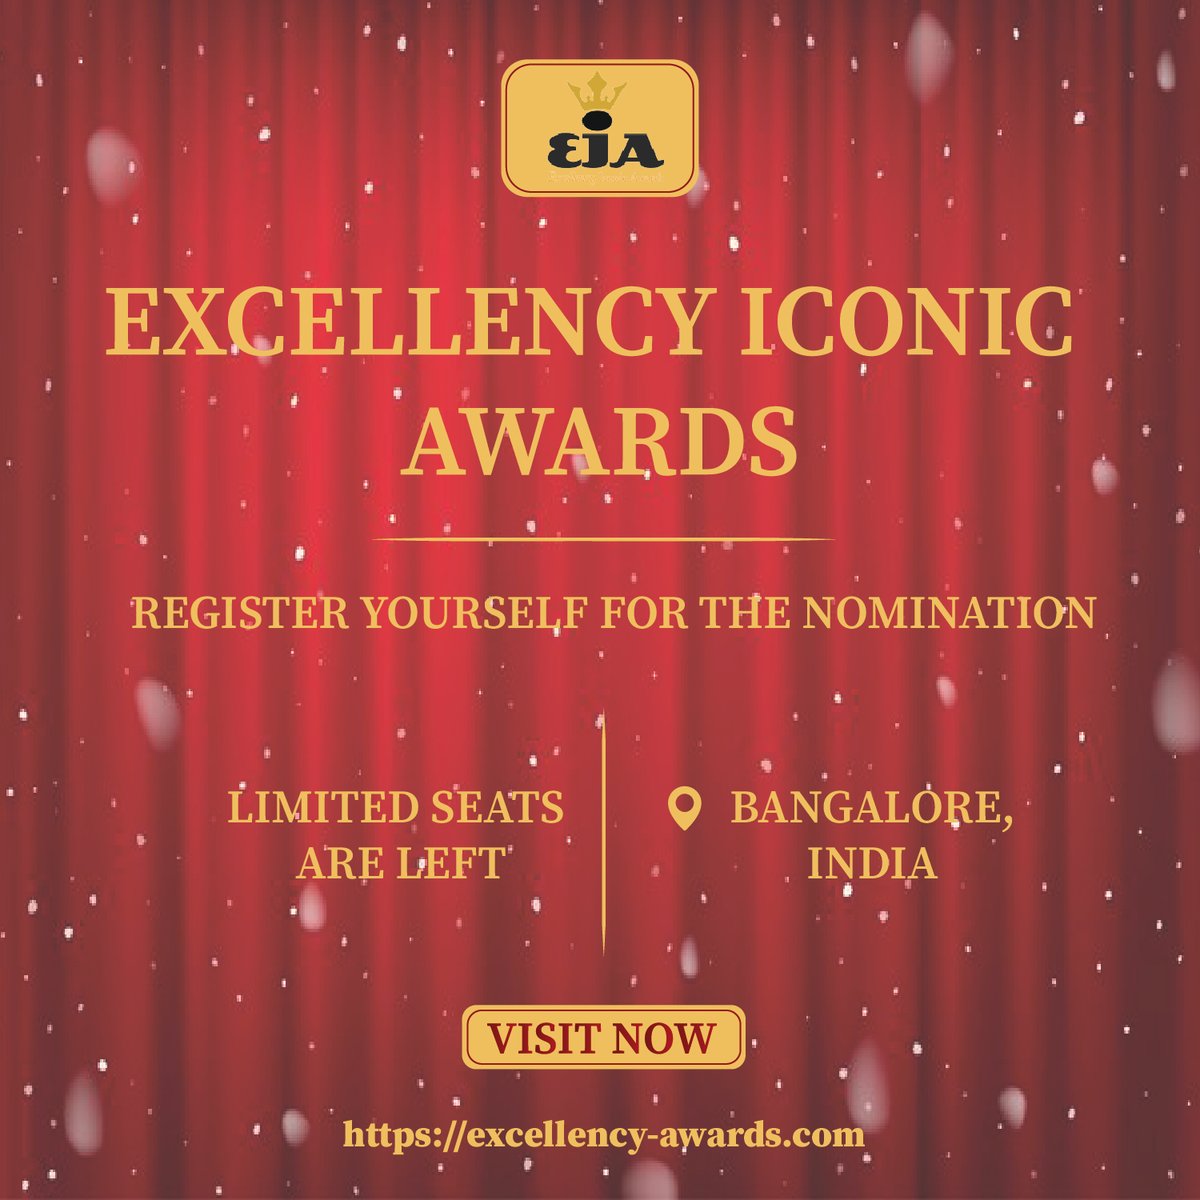 EXCELLENCY ICONIC AWARDS

LAST DATE OF NOMINATION: 14th SEPTEMBER 2023

CEREMONY: 14th OCTOBER, 2023 (BANGALORE, INDIA)
REGISTER YOURSELF FOR THE NOMINATION

LIMITED SEATS ARE LEFT
ONLY ₹ 21,000 FOR NOMINATION
.
.
.
#awardnight #celebraties #talentmanagement #talentagents